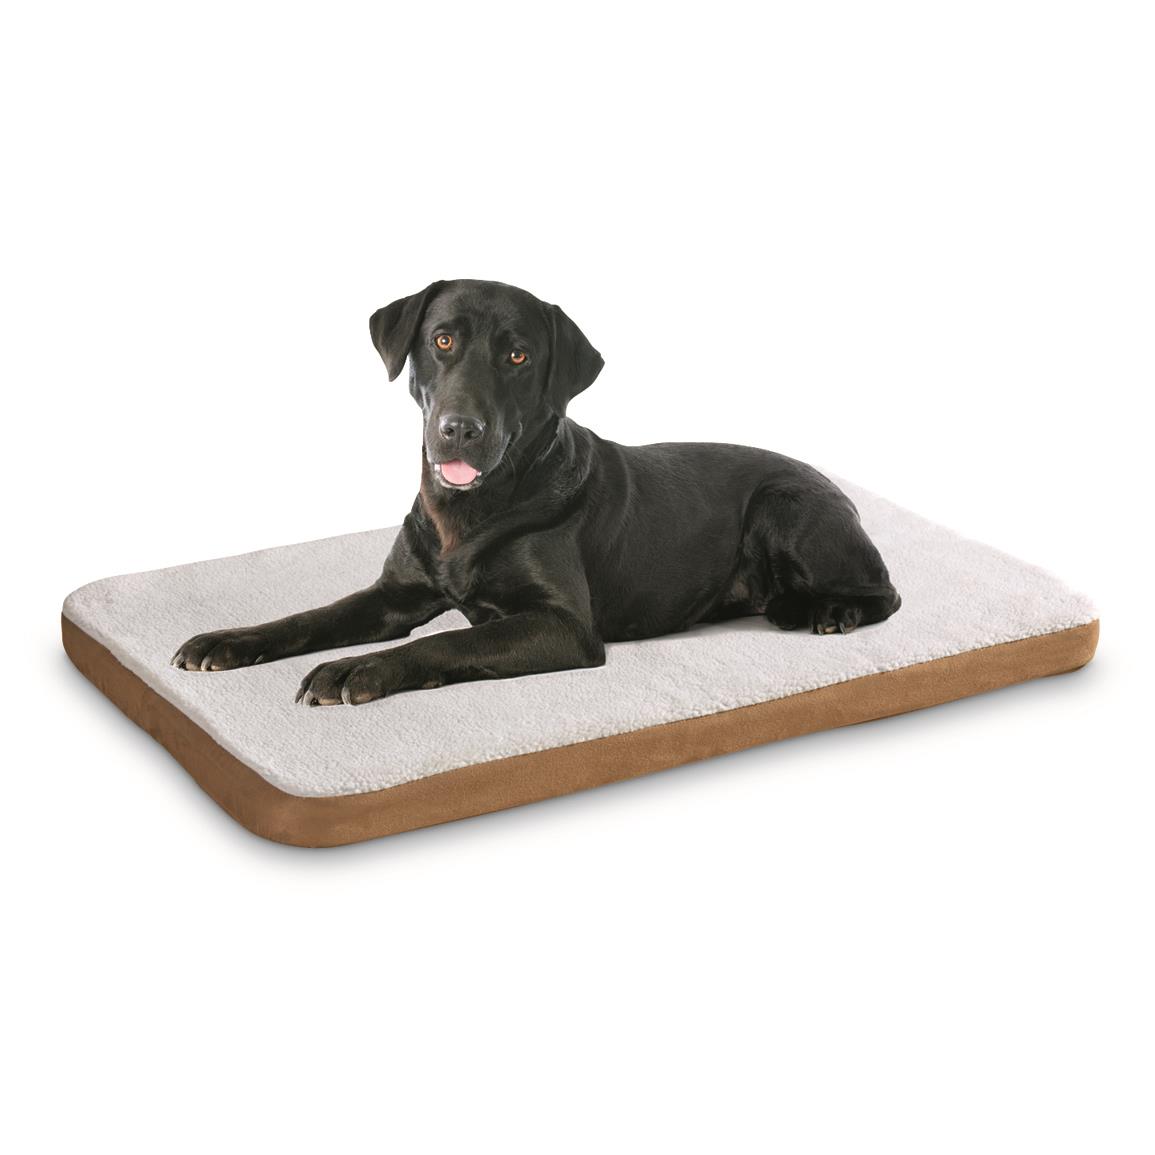 Heated Pet Bed - 622694, Pet Accessories at Sportsman's Guide